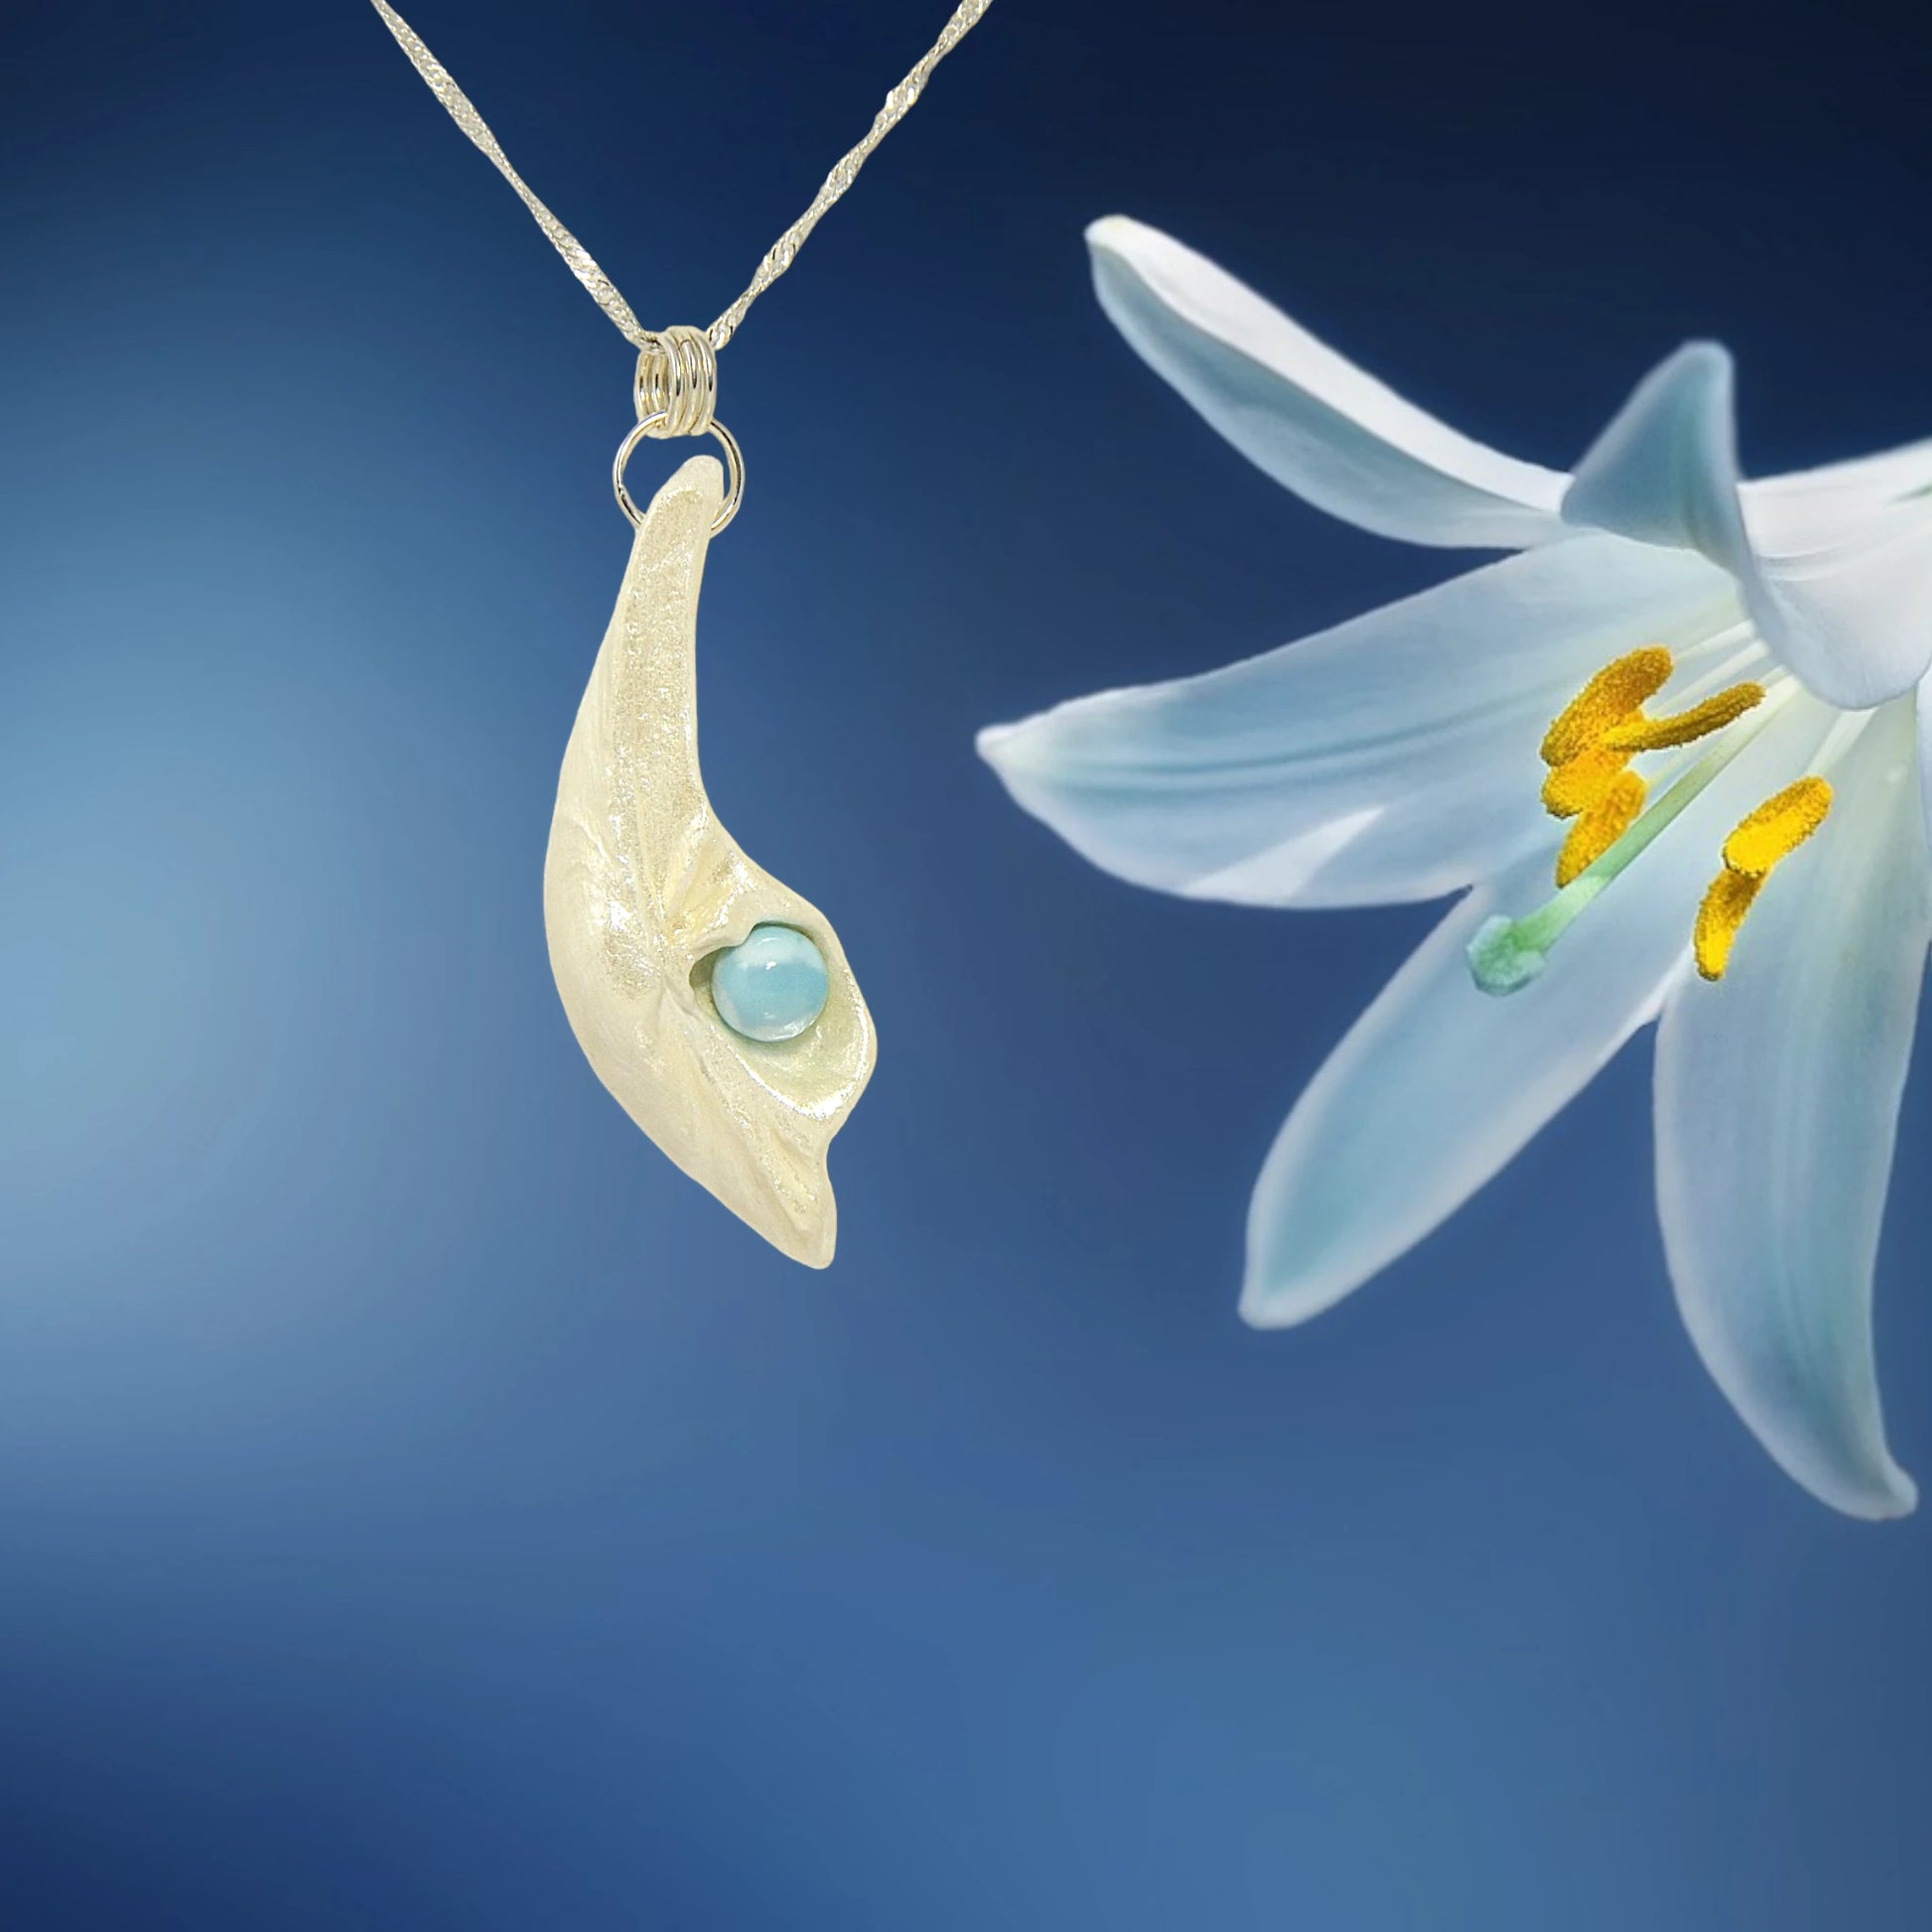 Larimar Moon Natural seashell a beautiful 10 mm Round Larimar Gemstone compliments the pendant. The pendant is shown on a white necklace displayer with white lily flower and a blue background.